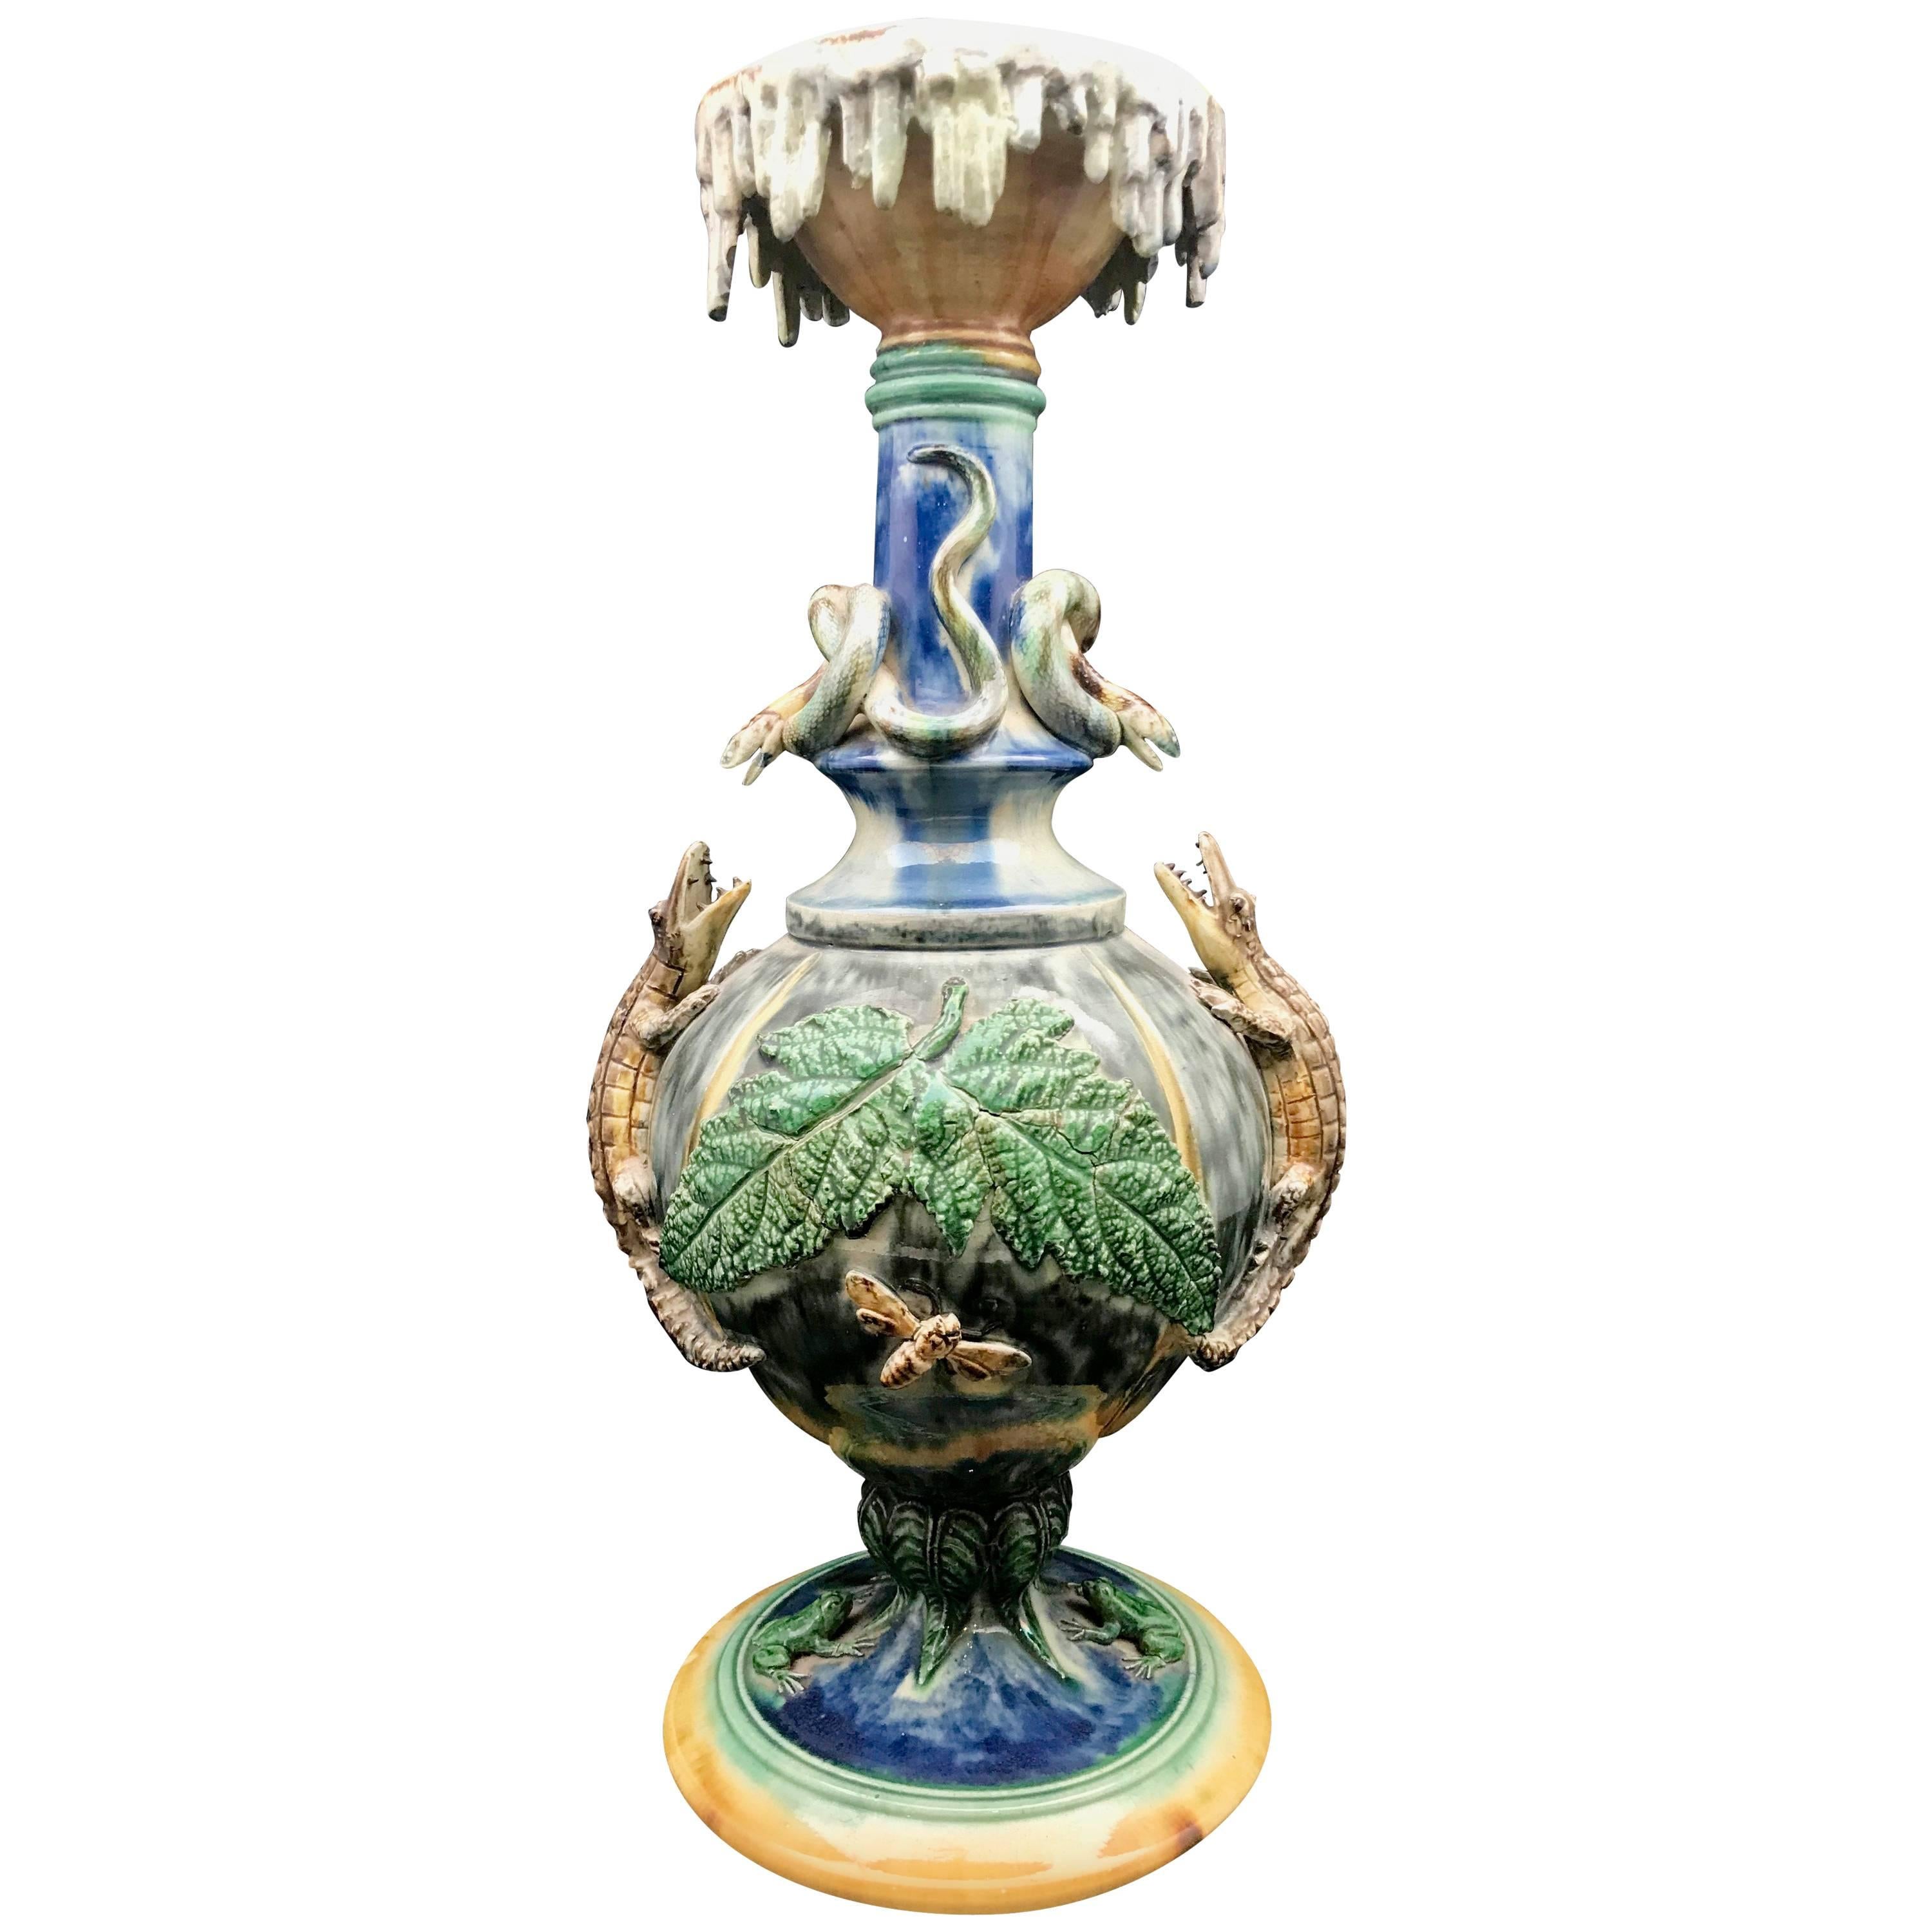 Late 19th Century Majolica Palissy Vase with Snake, Alligator Frog and Bee Decor